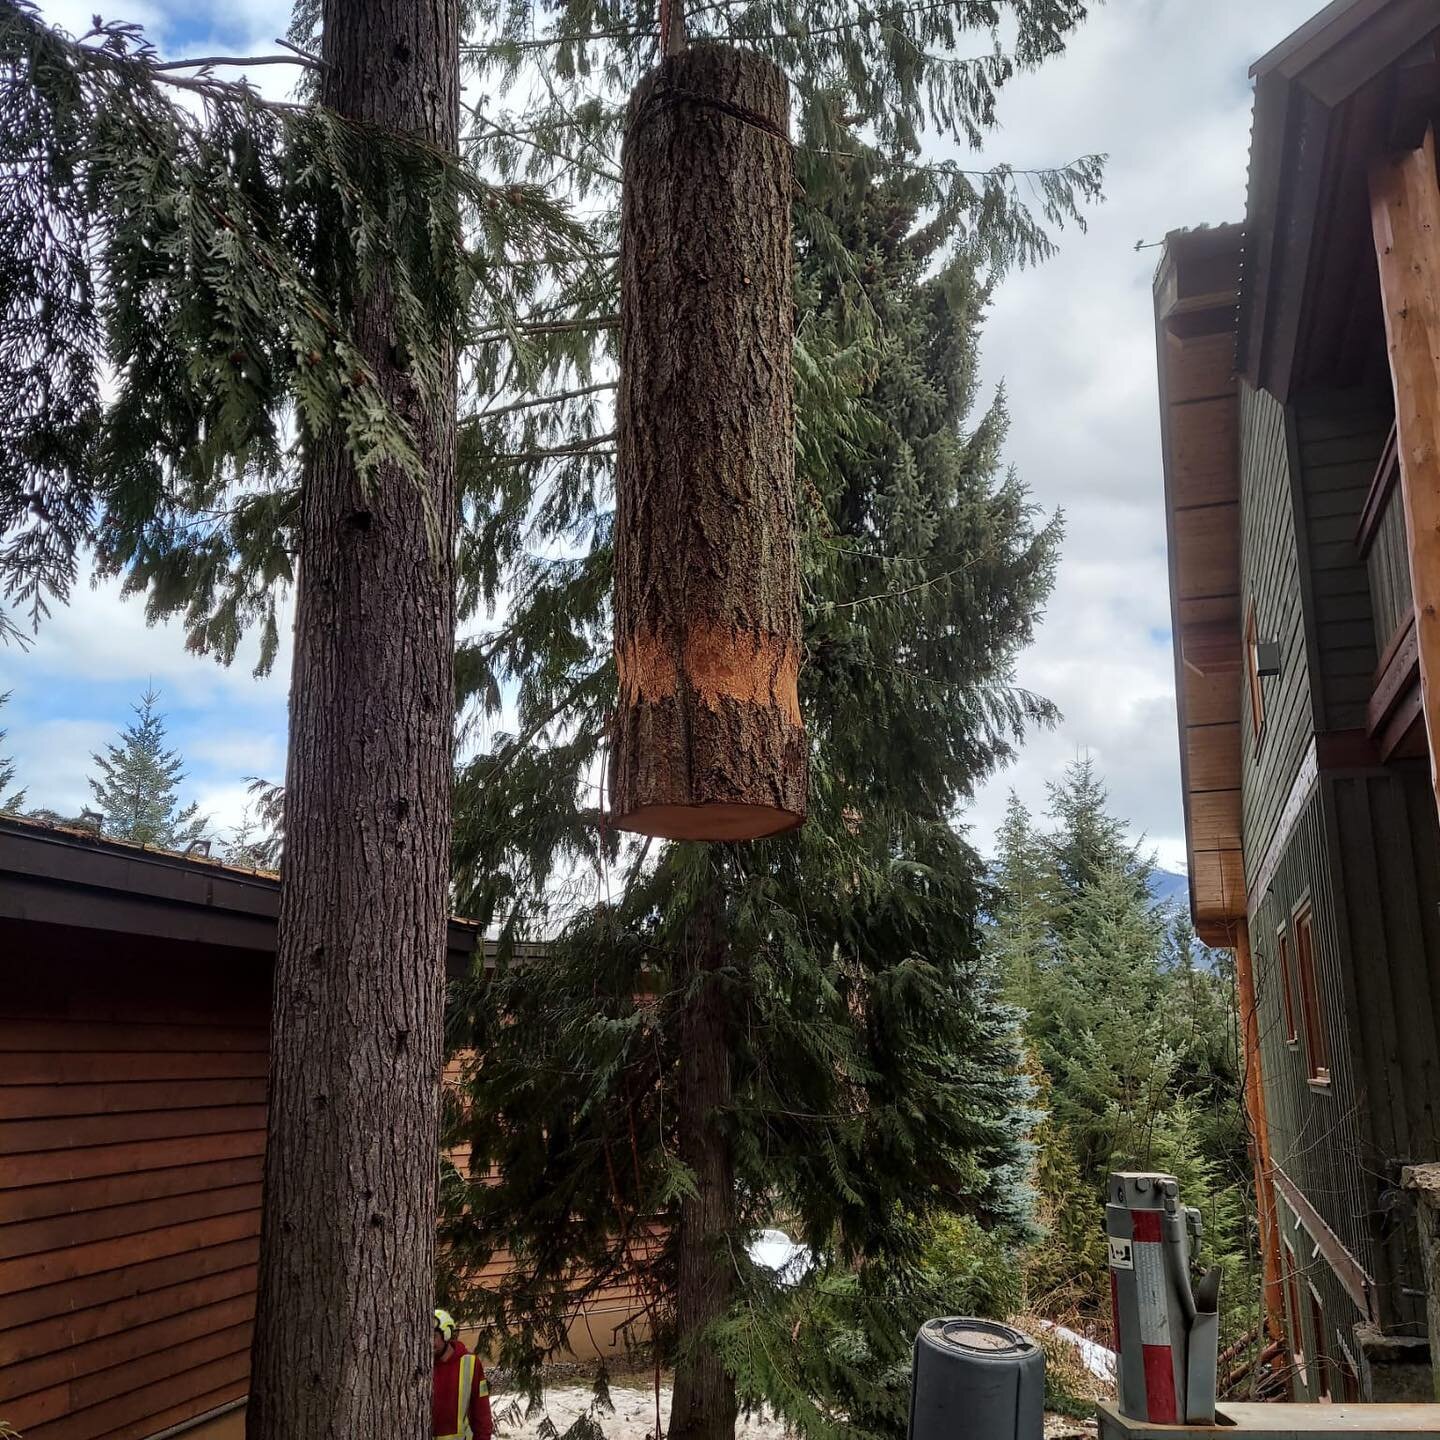 When the neighborhood firewood pirate ask&rsquo;s for some of the wood. 
#whistlerstreeservice
#squamishtreeservice
#westvantreeservice
#seatoskytreeservice
#climbingarborists
#viewsfordays
#officeviews
#nobaddays
#overloaded 🤔  #ifitfitsitships